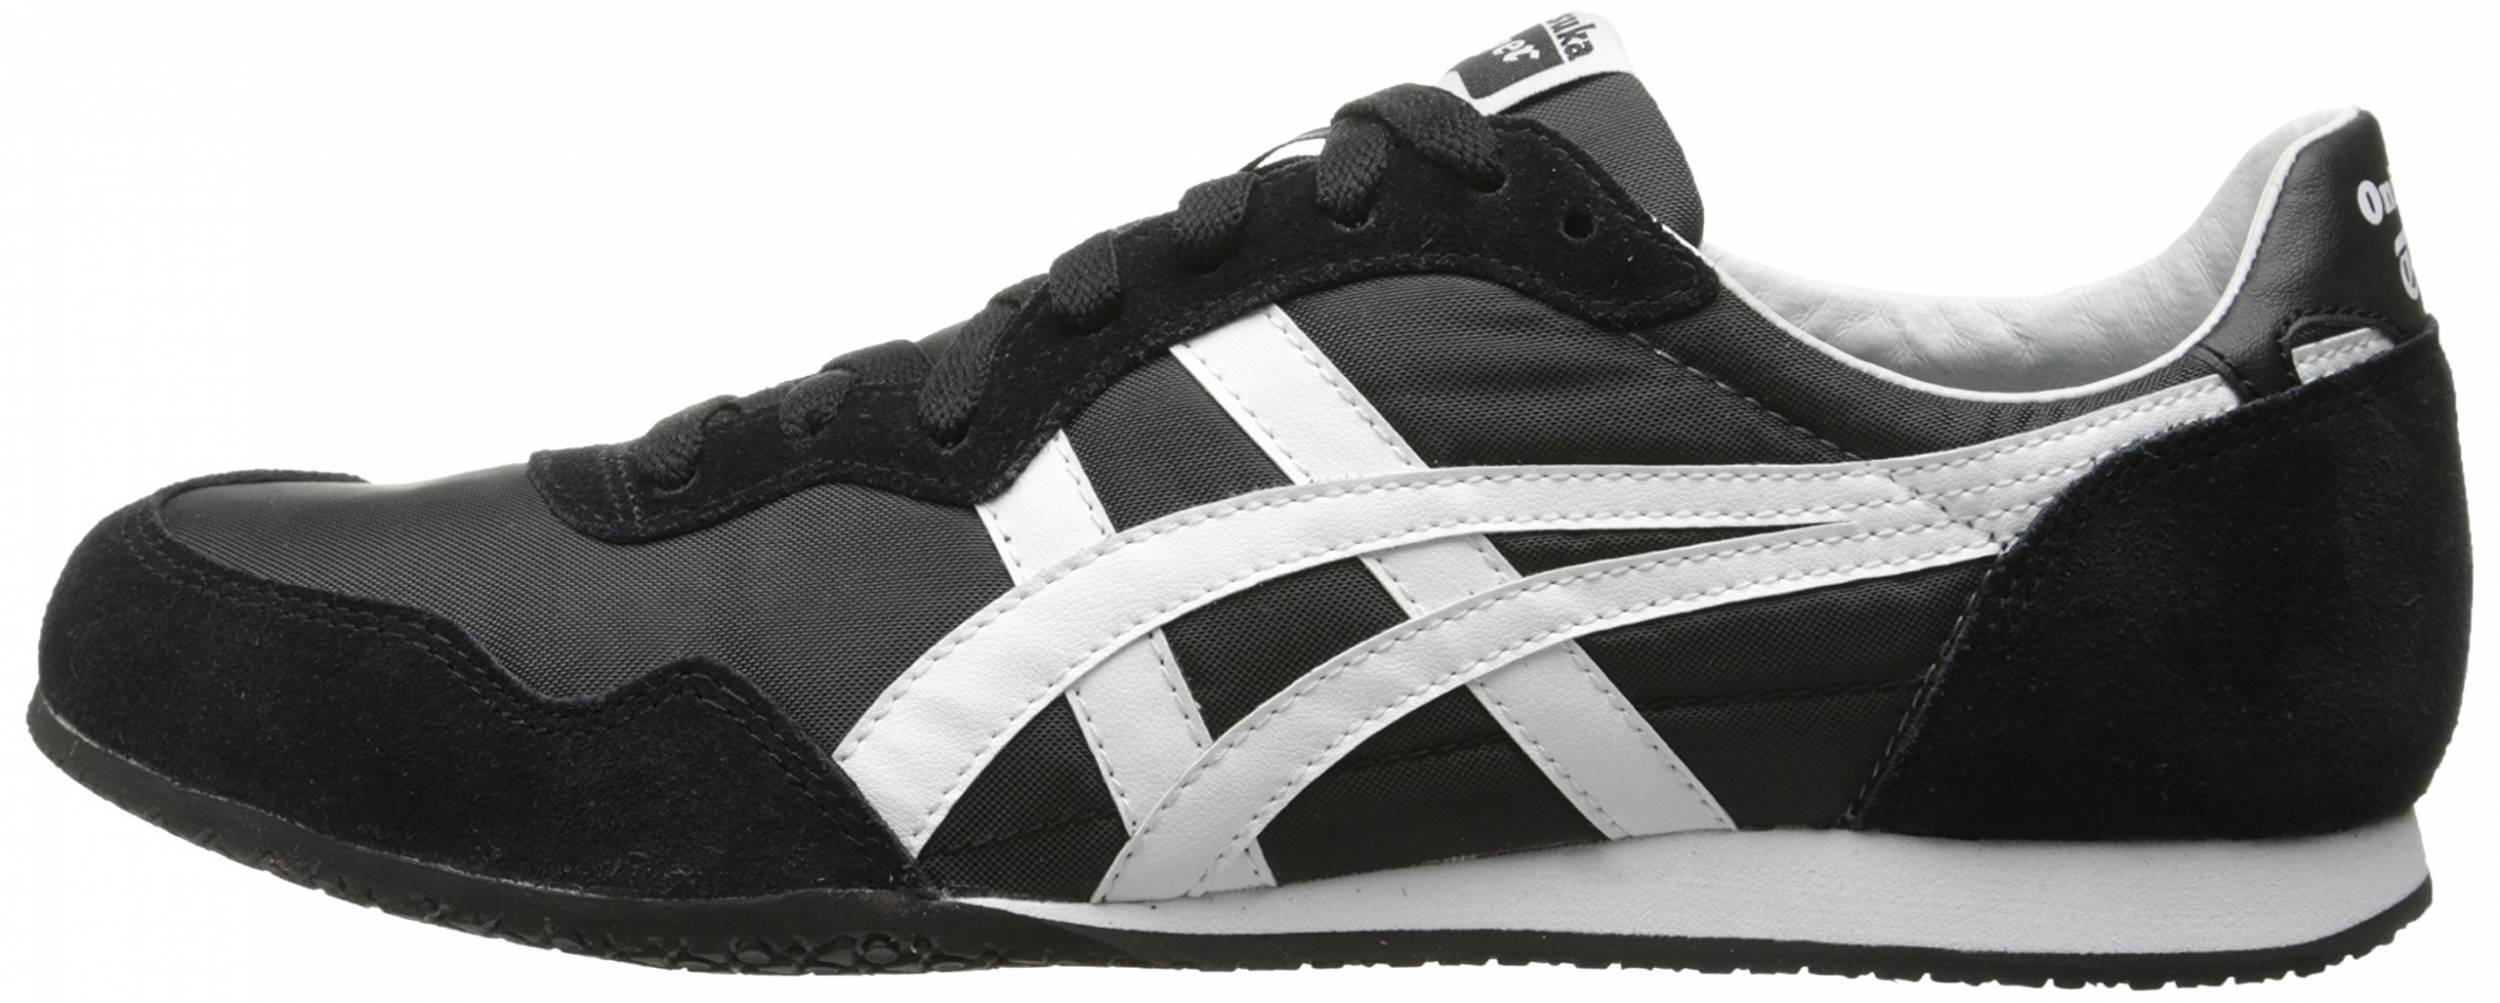 Save 55% on Onitsuka Tiger Sneakers (33 